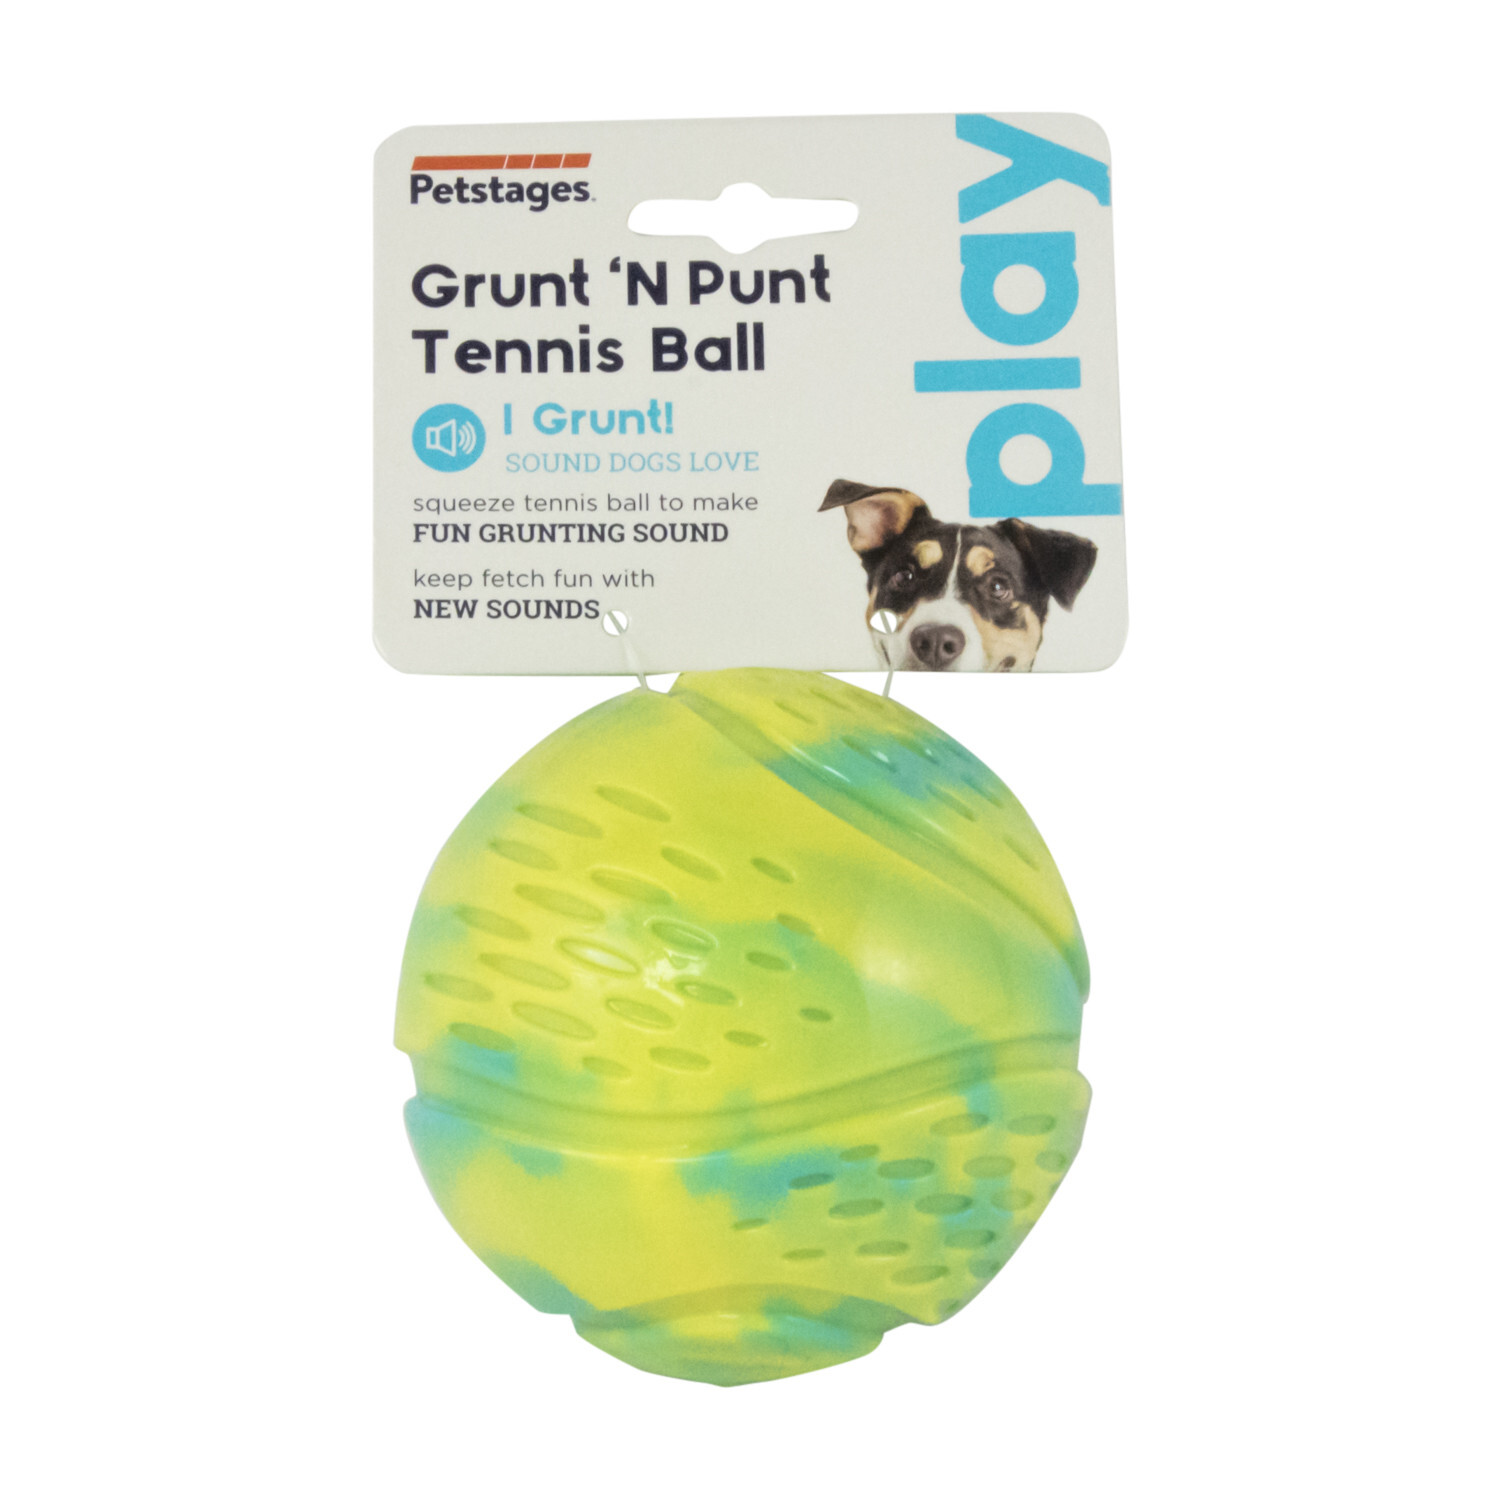 Petstages Grunt and Punt Tennis Ball Fetch Dog Toy